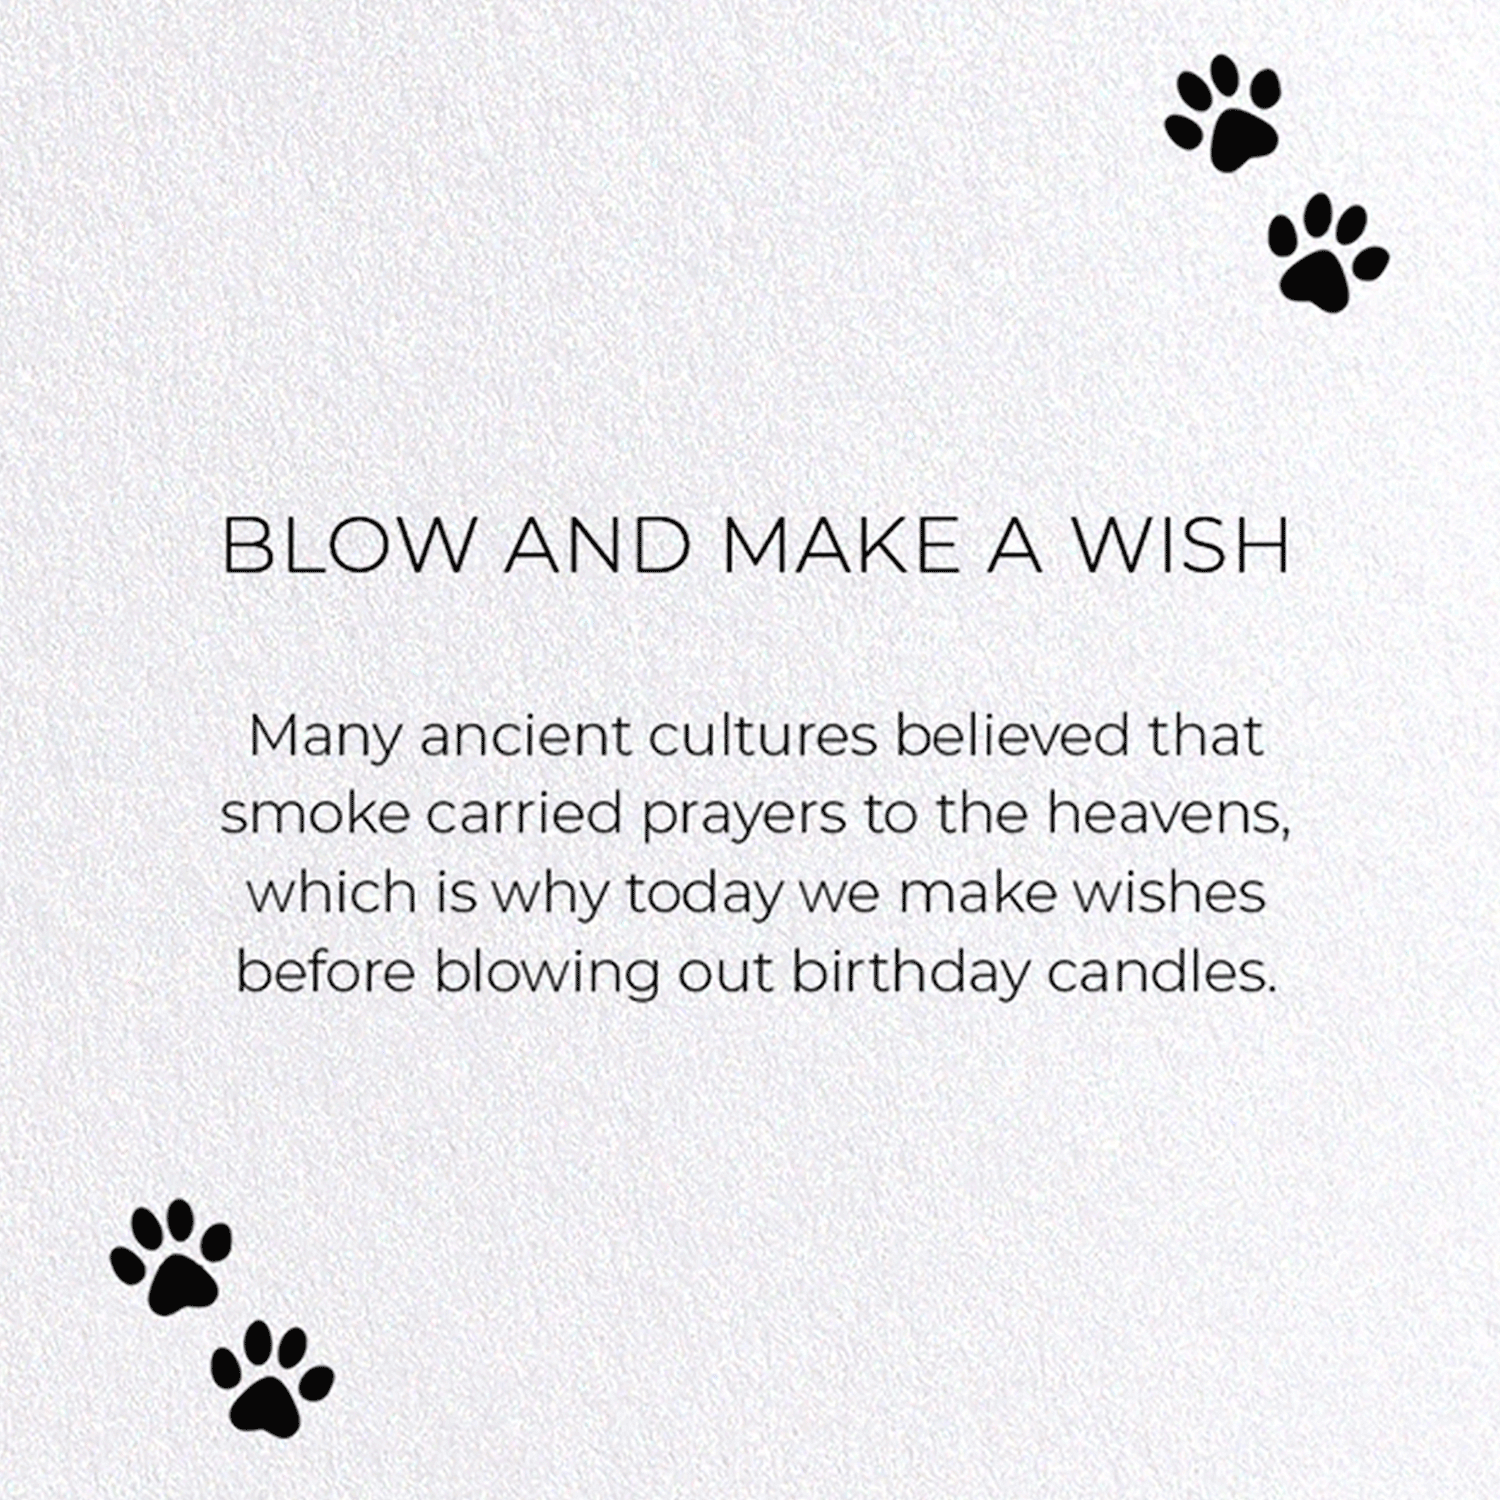 BLOW AND MAKE A WISH